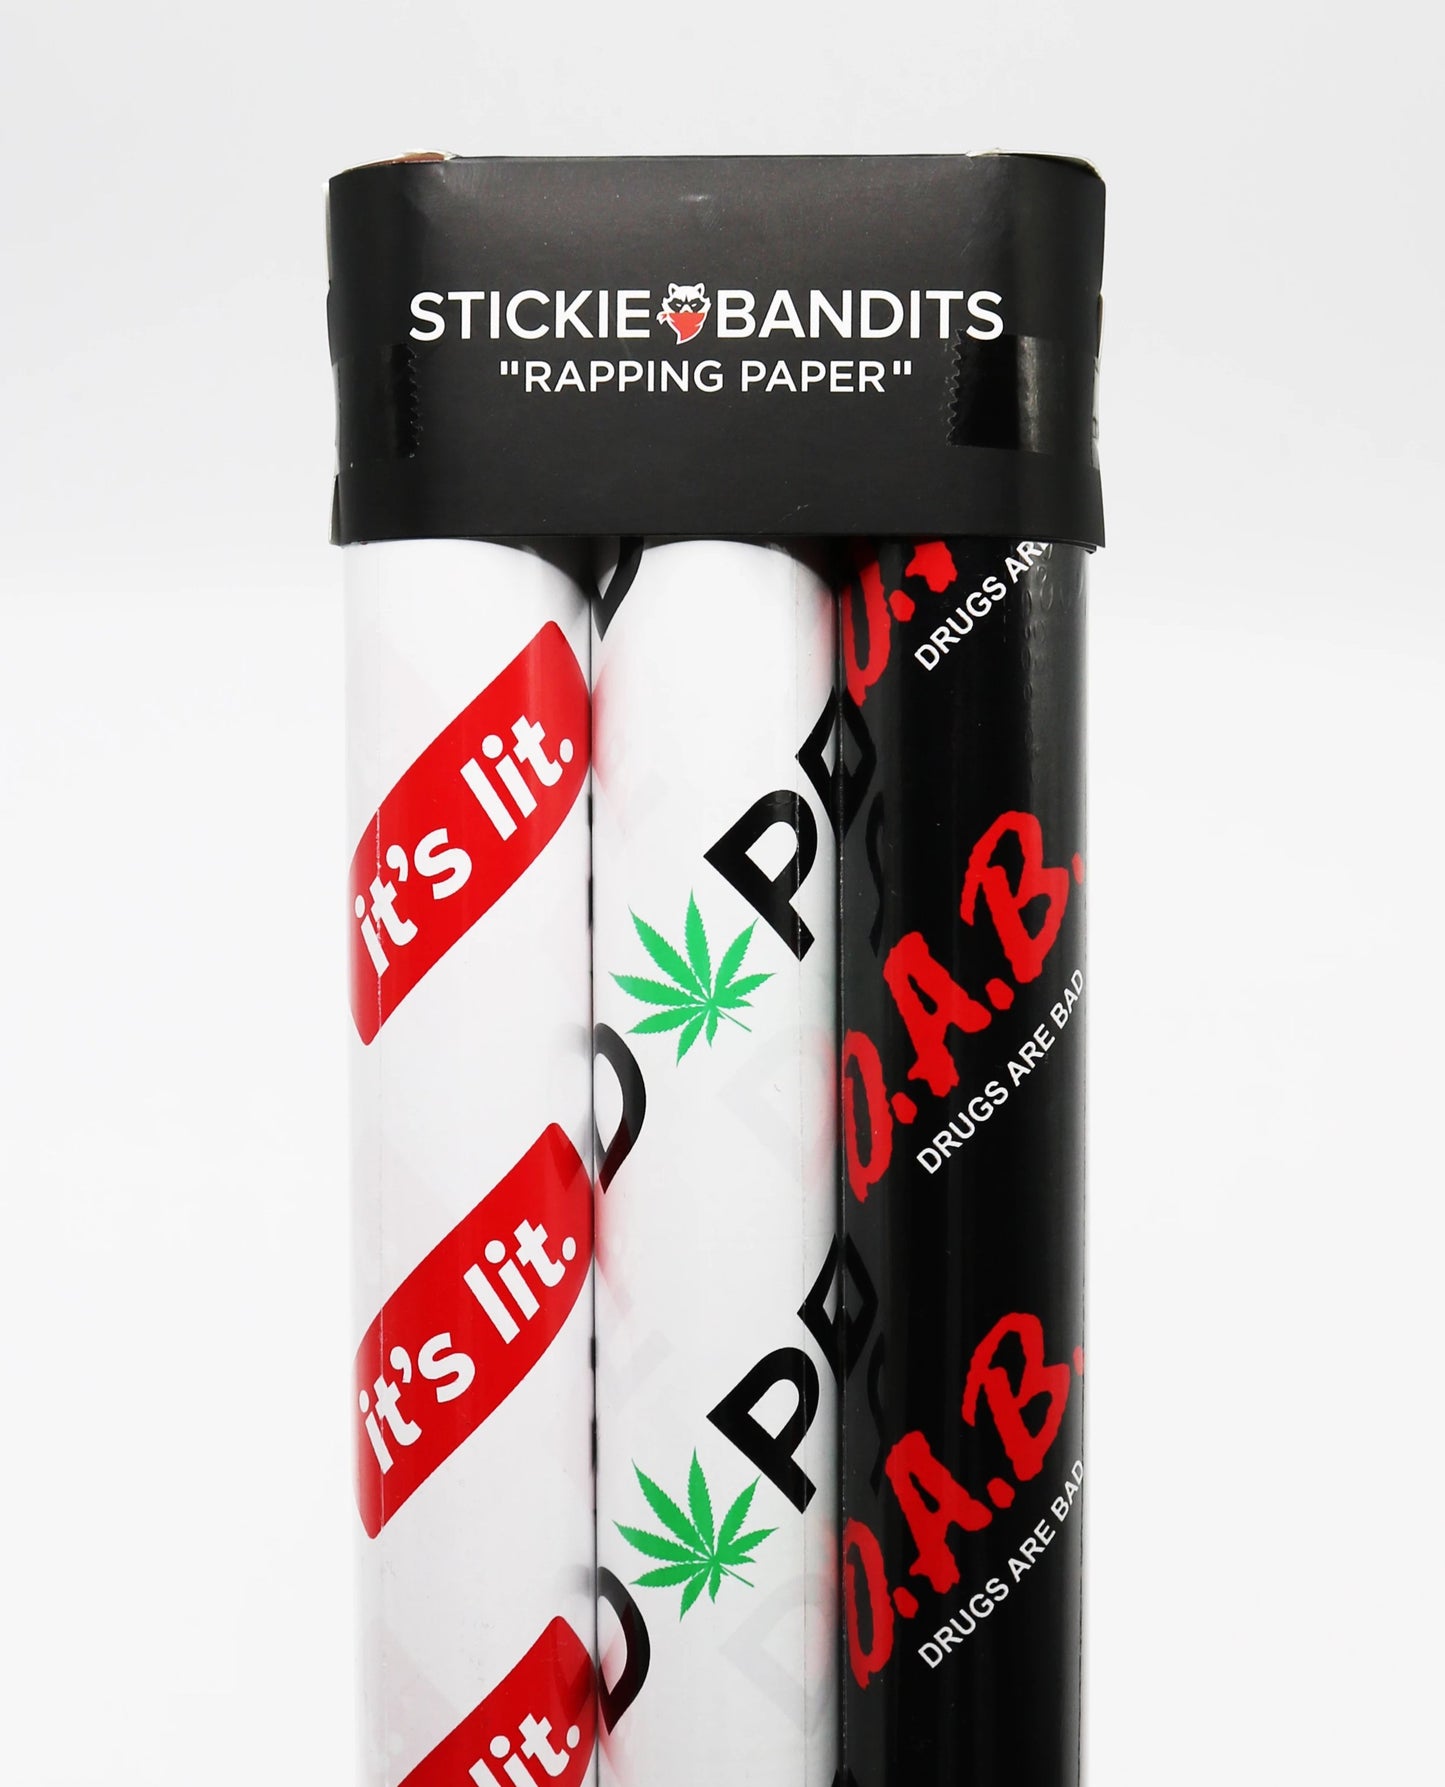 Lit Pack "Rapping Paper"